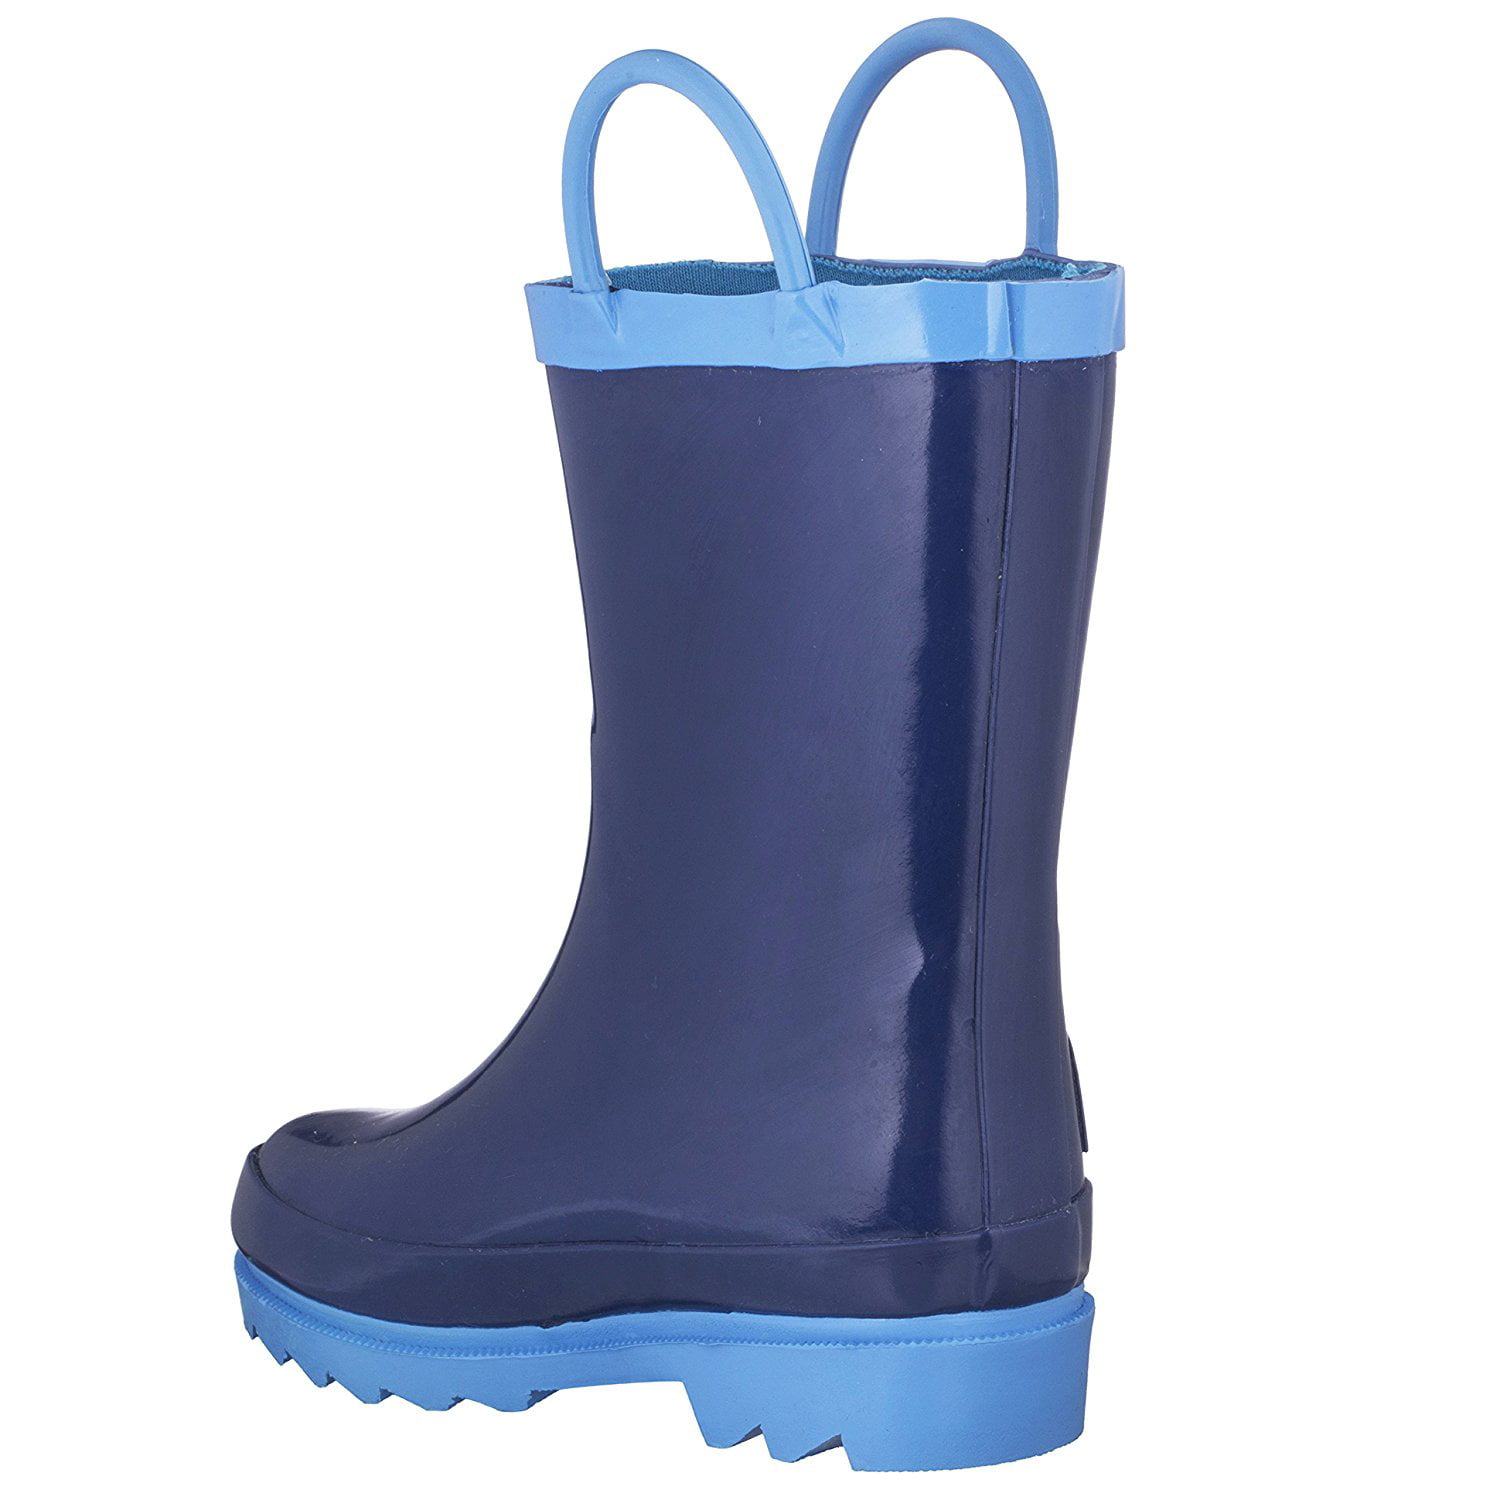 Thomas The Train Toddler Boys Pull-On Rubber Rain Boots